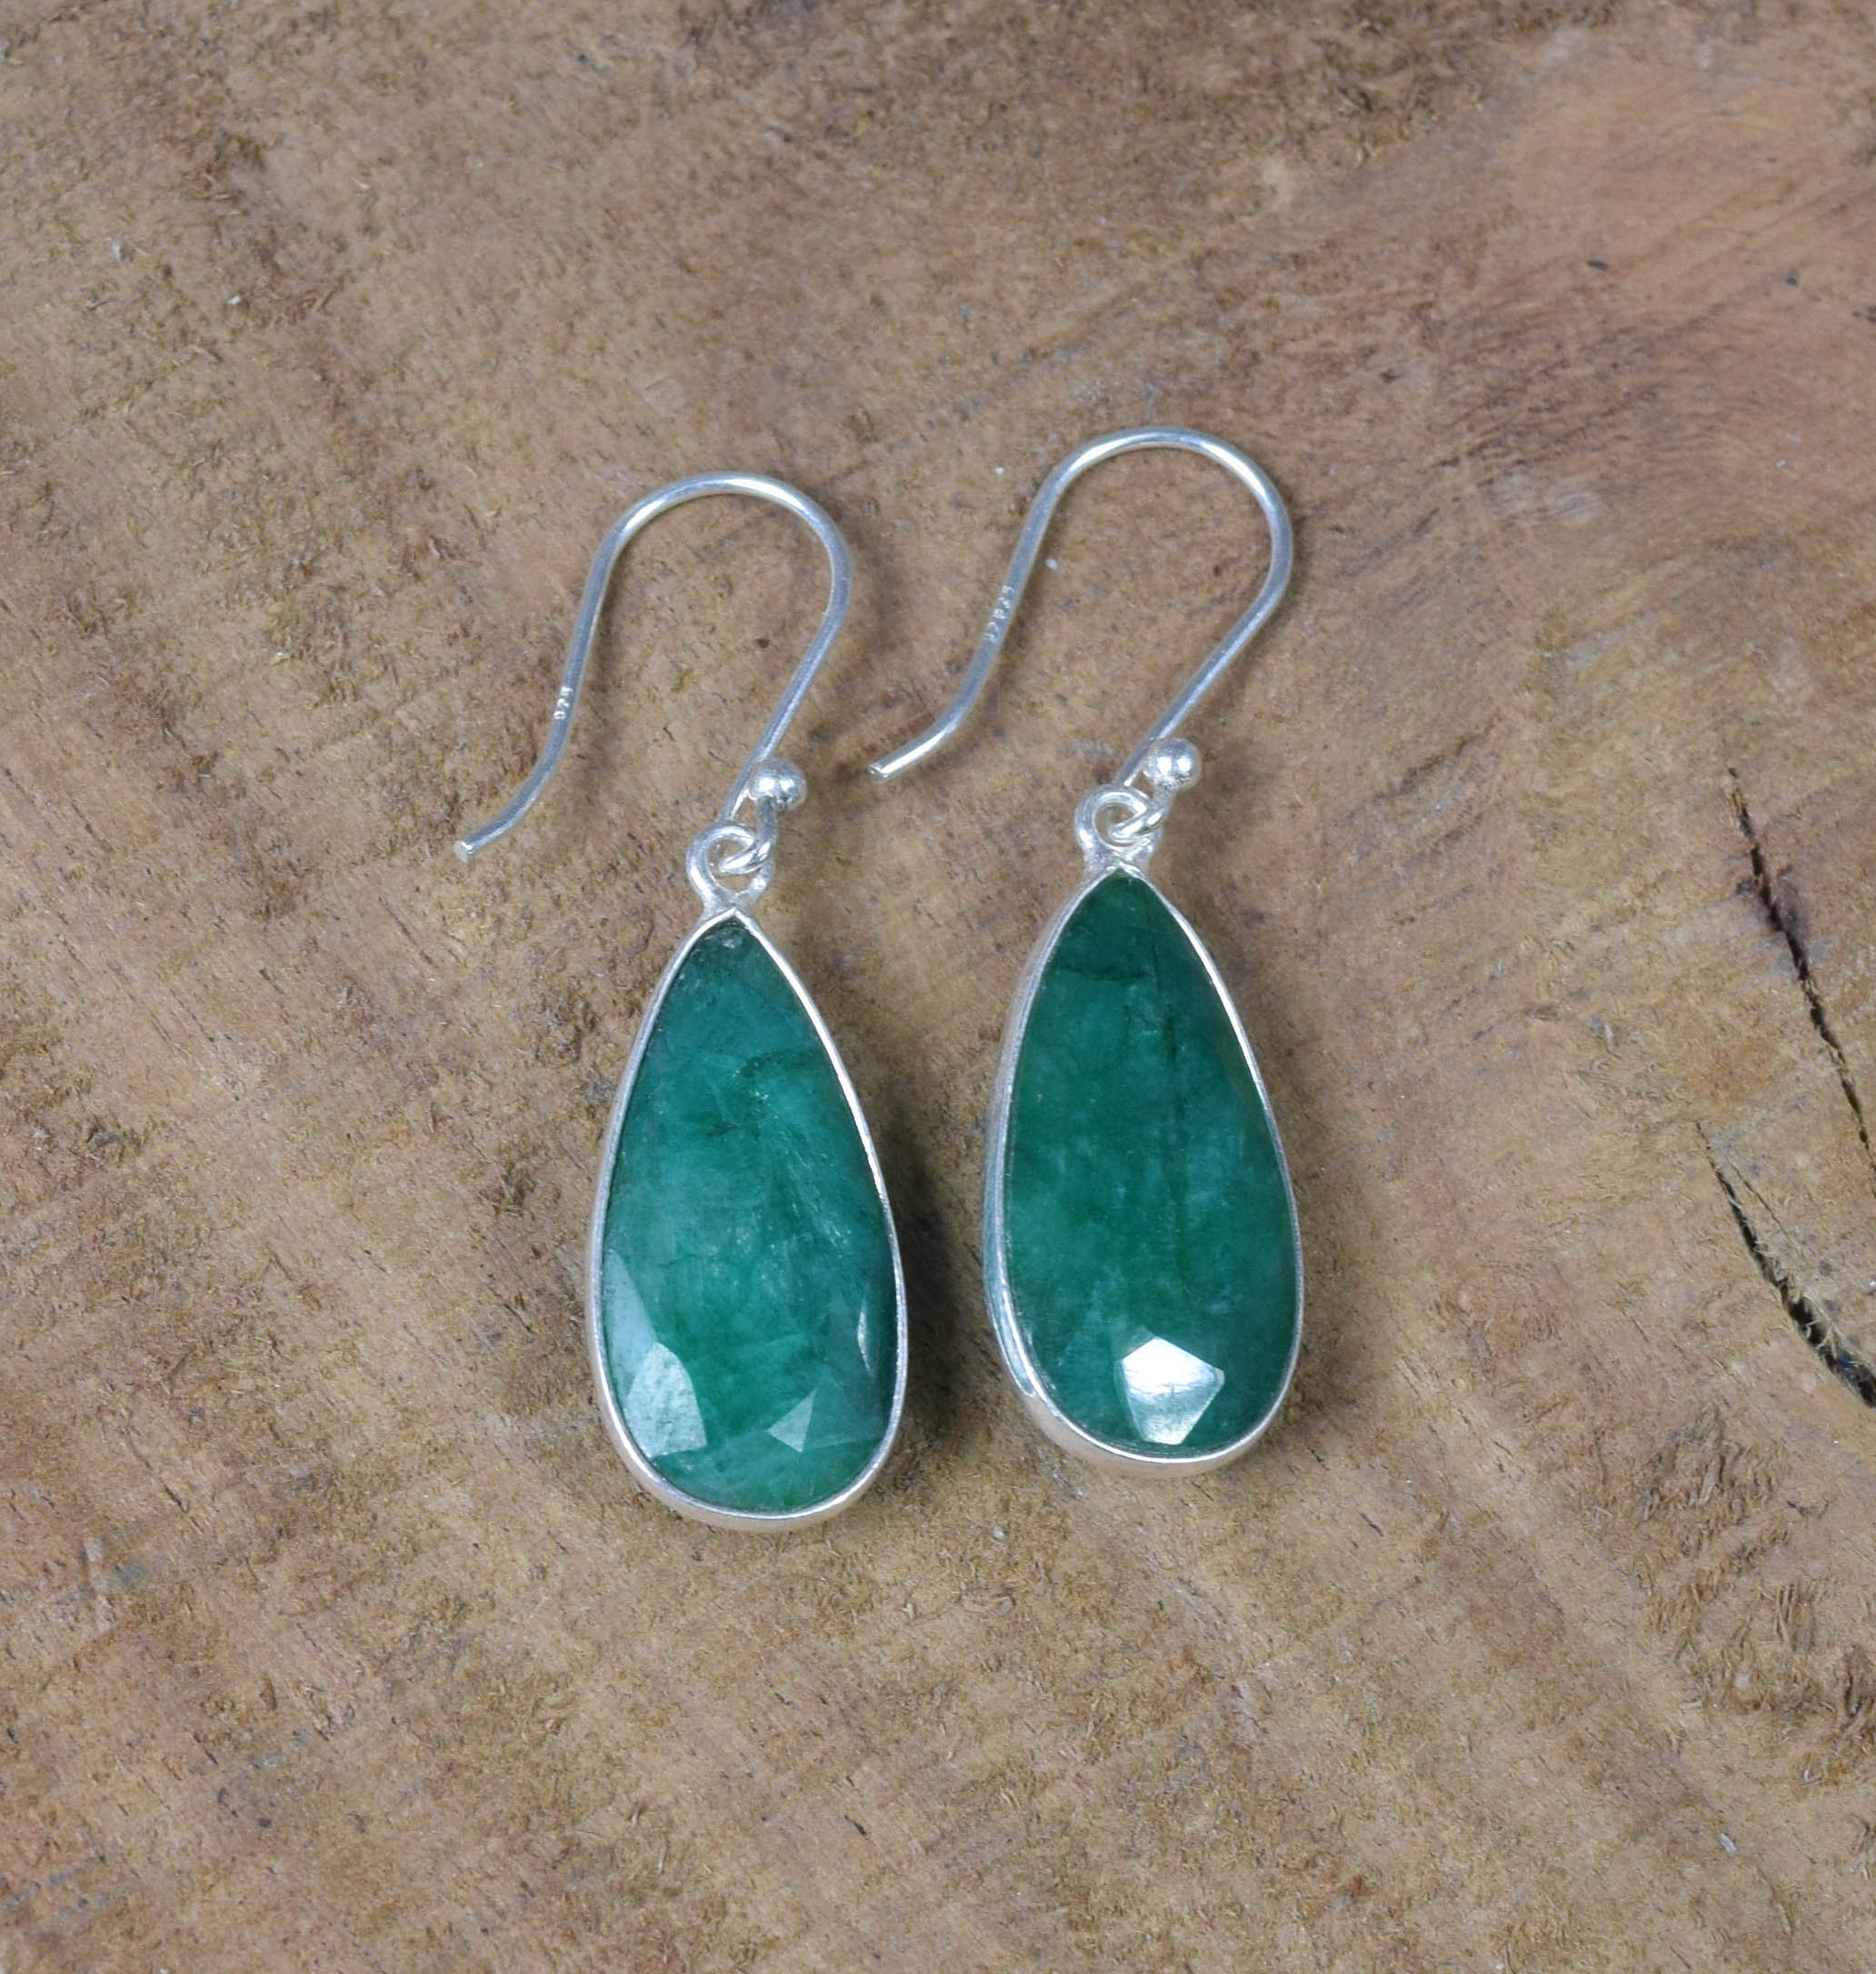 WHOLESALE 11PR 925 SILVER PLATED FACETED GREEN EMERALD HOOK EARRING LOT G268 